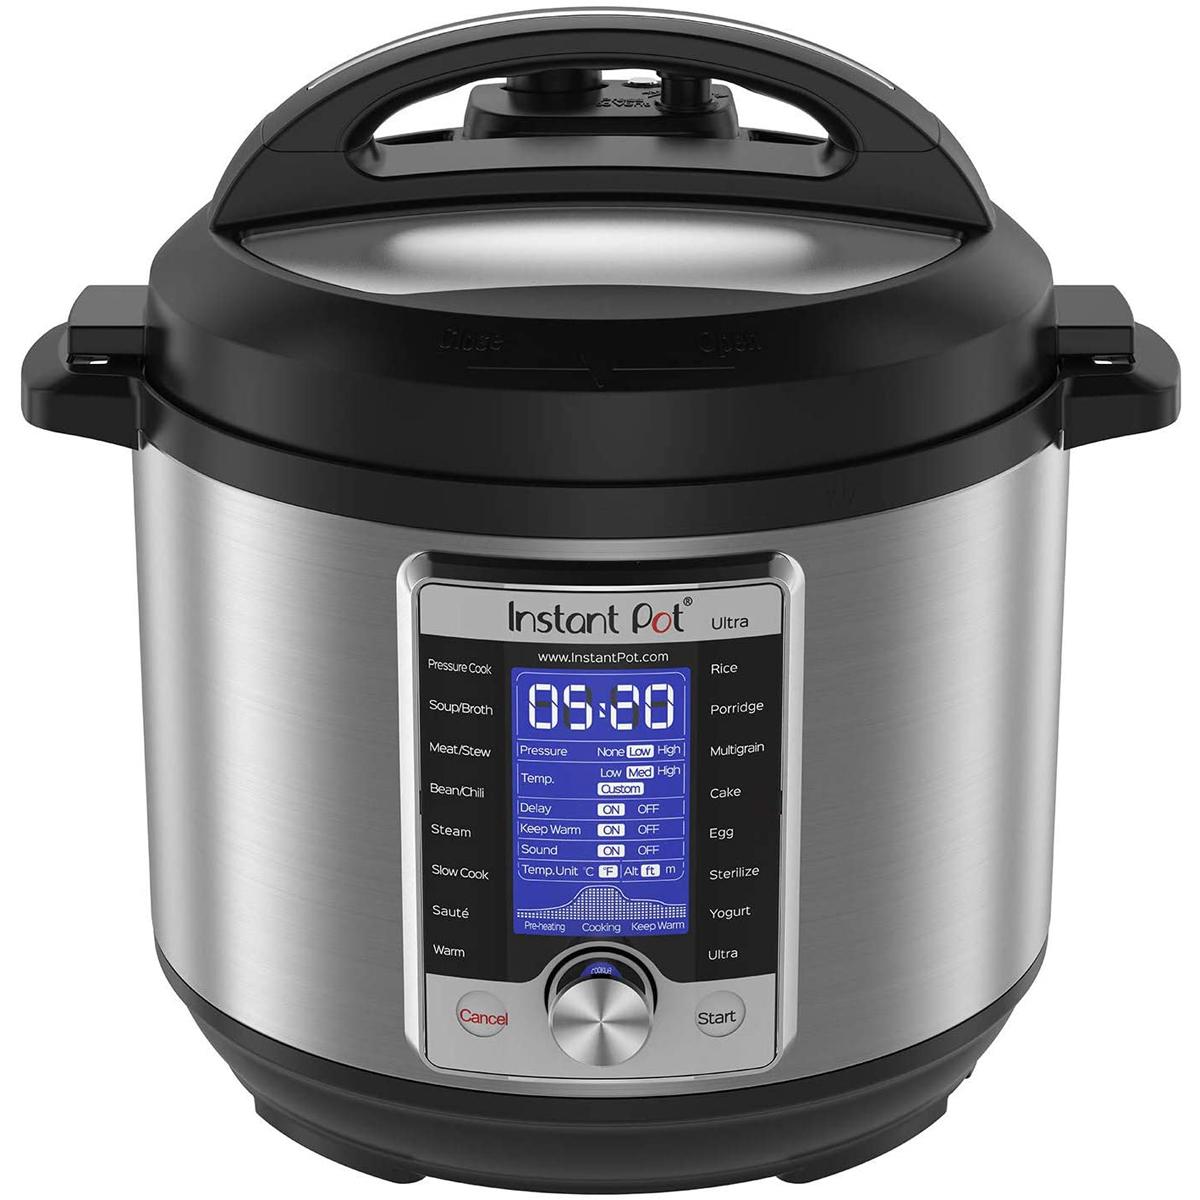 Instant Pot Ultra 60 Ultra Pressure Cooker for $69.99 Shipped